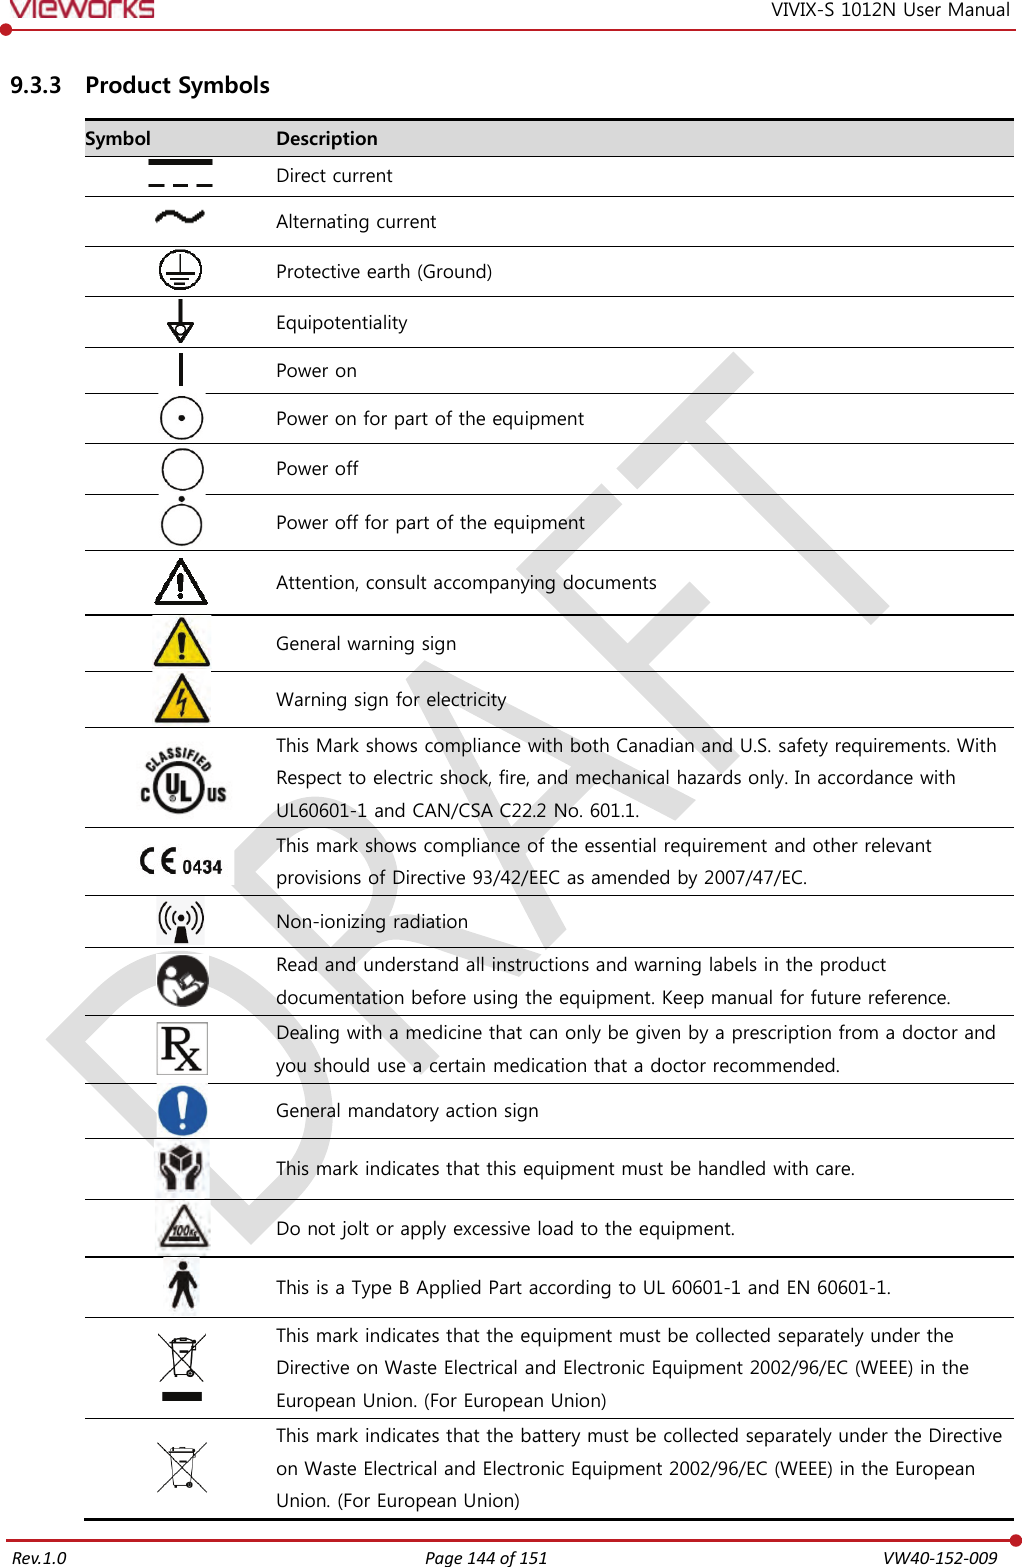   Rev.1.0 Page 144 of 151  VW40-152-009 VIVIX-S 1012N User Manual 9.3.3 Product Symbols Symbol Description  Direct current  Alternating current  Protective earth (Ground)  Equipotentiality  Power on  Power on for part of the equipment  Power off  Power off for part of the equipment  Attention, consult accompanying documents  General warning sign  Warning sign for electricity  This Mark shows compliance with both Canadian and U.S. safety requirements. With Respect to electric shock, fire, and mechanical hazards only. In accordance with UL60601-1 and CAN/CSA C22.2 No. 601.1.  This mark shows compliance of the essential requirement and other relevant provisions of Directive 93/42/EEC as amended by 2007/47/EC.  Non-ionizing radiation  Read and understand all instructions and warning labels in the product documentation before using the equipment. Keep manual for future reference.  Dealing with a medicine that can only be given by a prescription from a doctor and you should use a certain medication that a doctor recommended.  General mandatory action sign  This mark indicates that this equipment must be handled with care.  Do not jolt or apply excessive load to the equipment.  This is a Type B Applied Part according to UL 60601-1 and EN 60601-1.  This mark indicates that the equipment must be collected separately under the Directive on Waste Electrical and Electronic Equipment 2002/96/EC (WEEE) in the European Union. (For European Union)  This mark indicates that the battery must be collected separately under the Directive on Waste Electrical and Electronic Equipment 2002/96/EC (WEEE) in the European Union. (For European Union) 